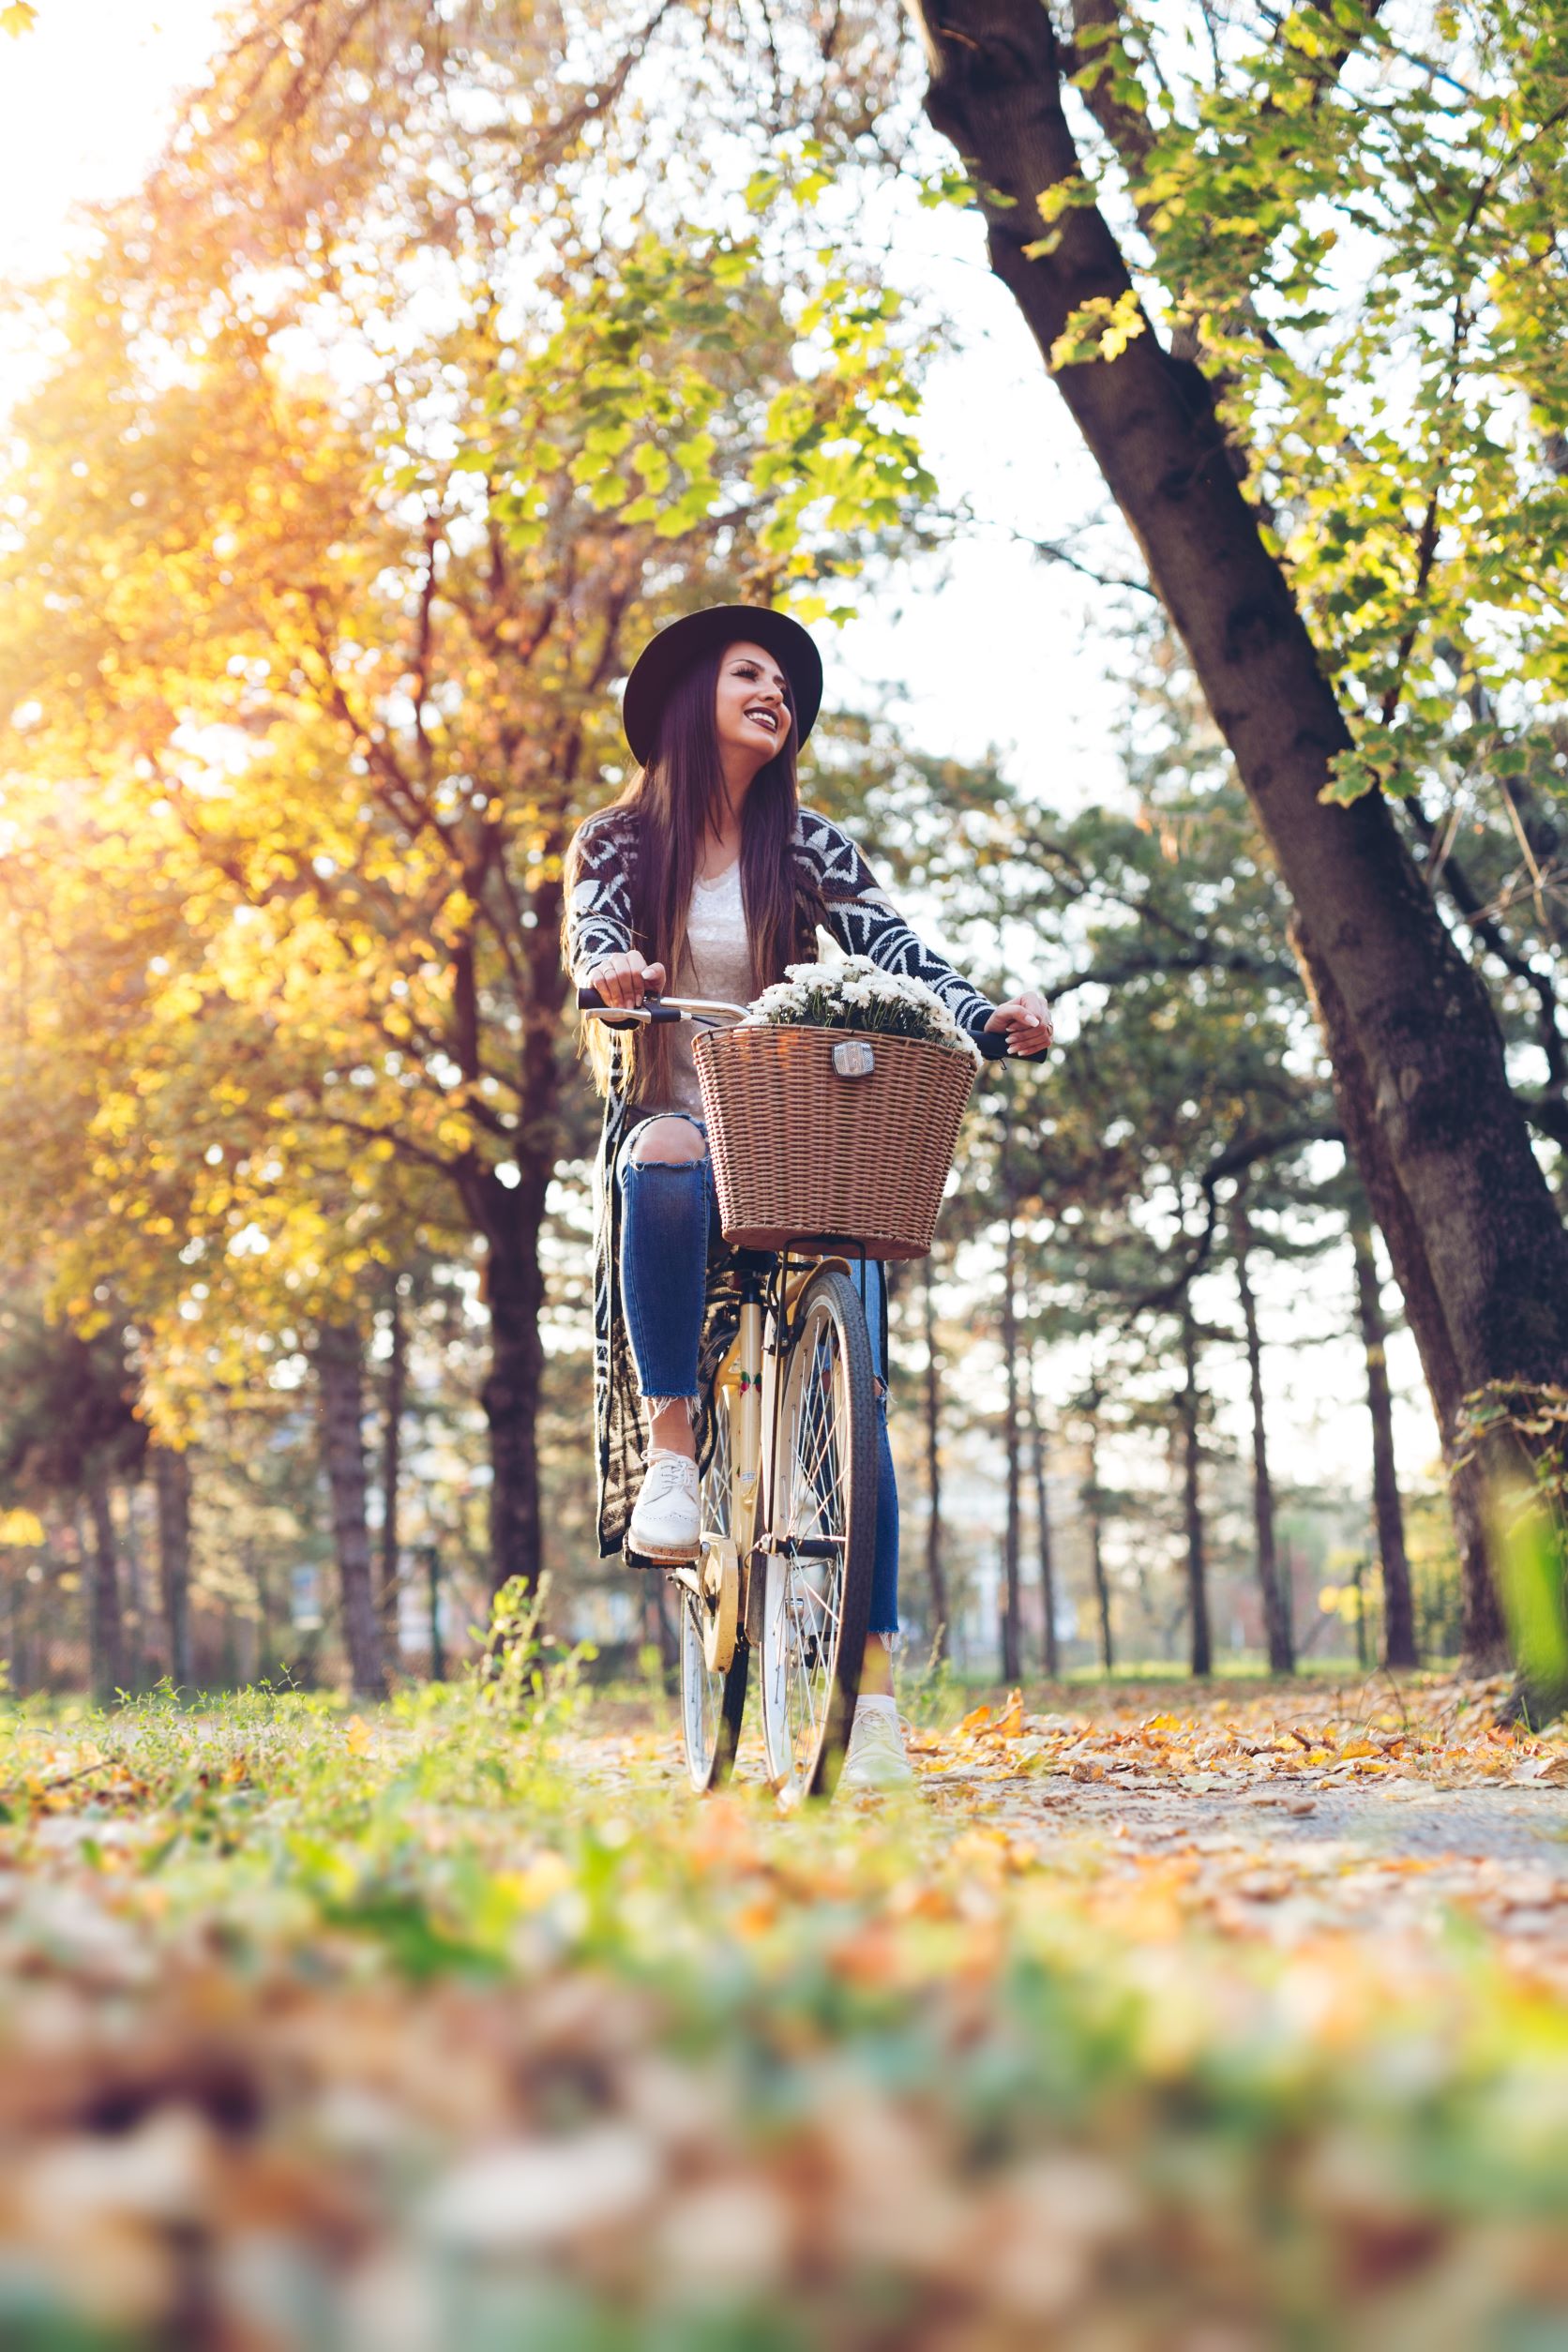 Woman riding a bike with basket at the front